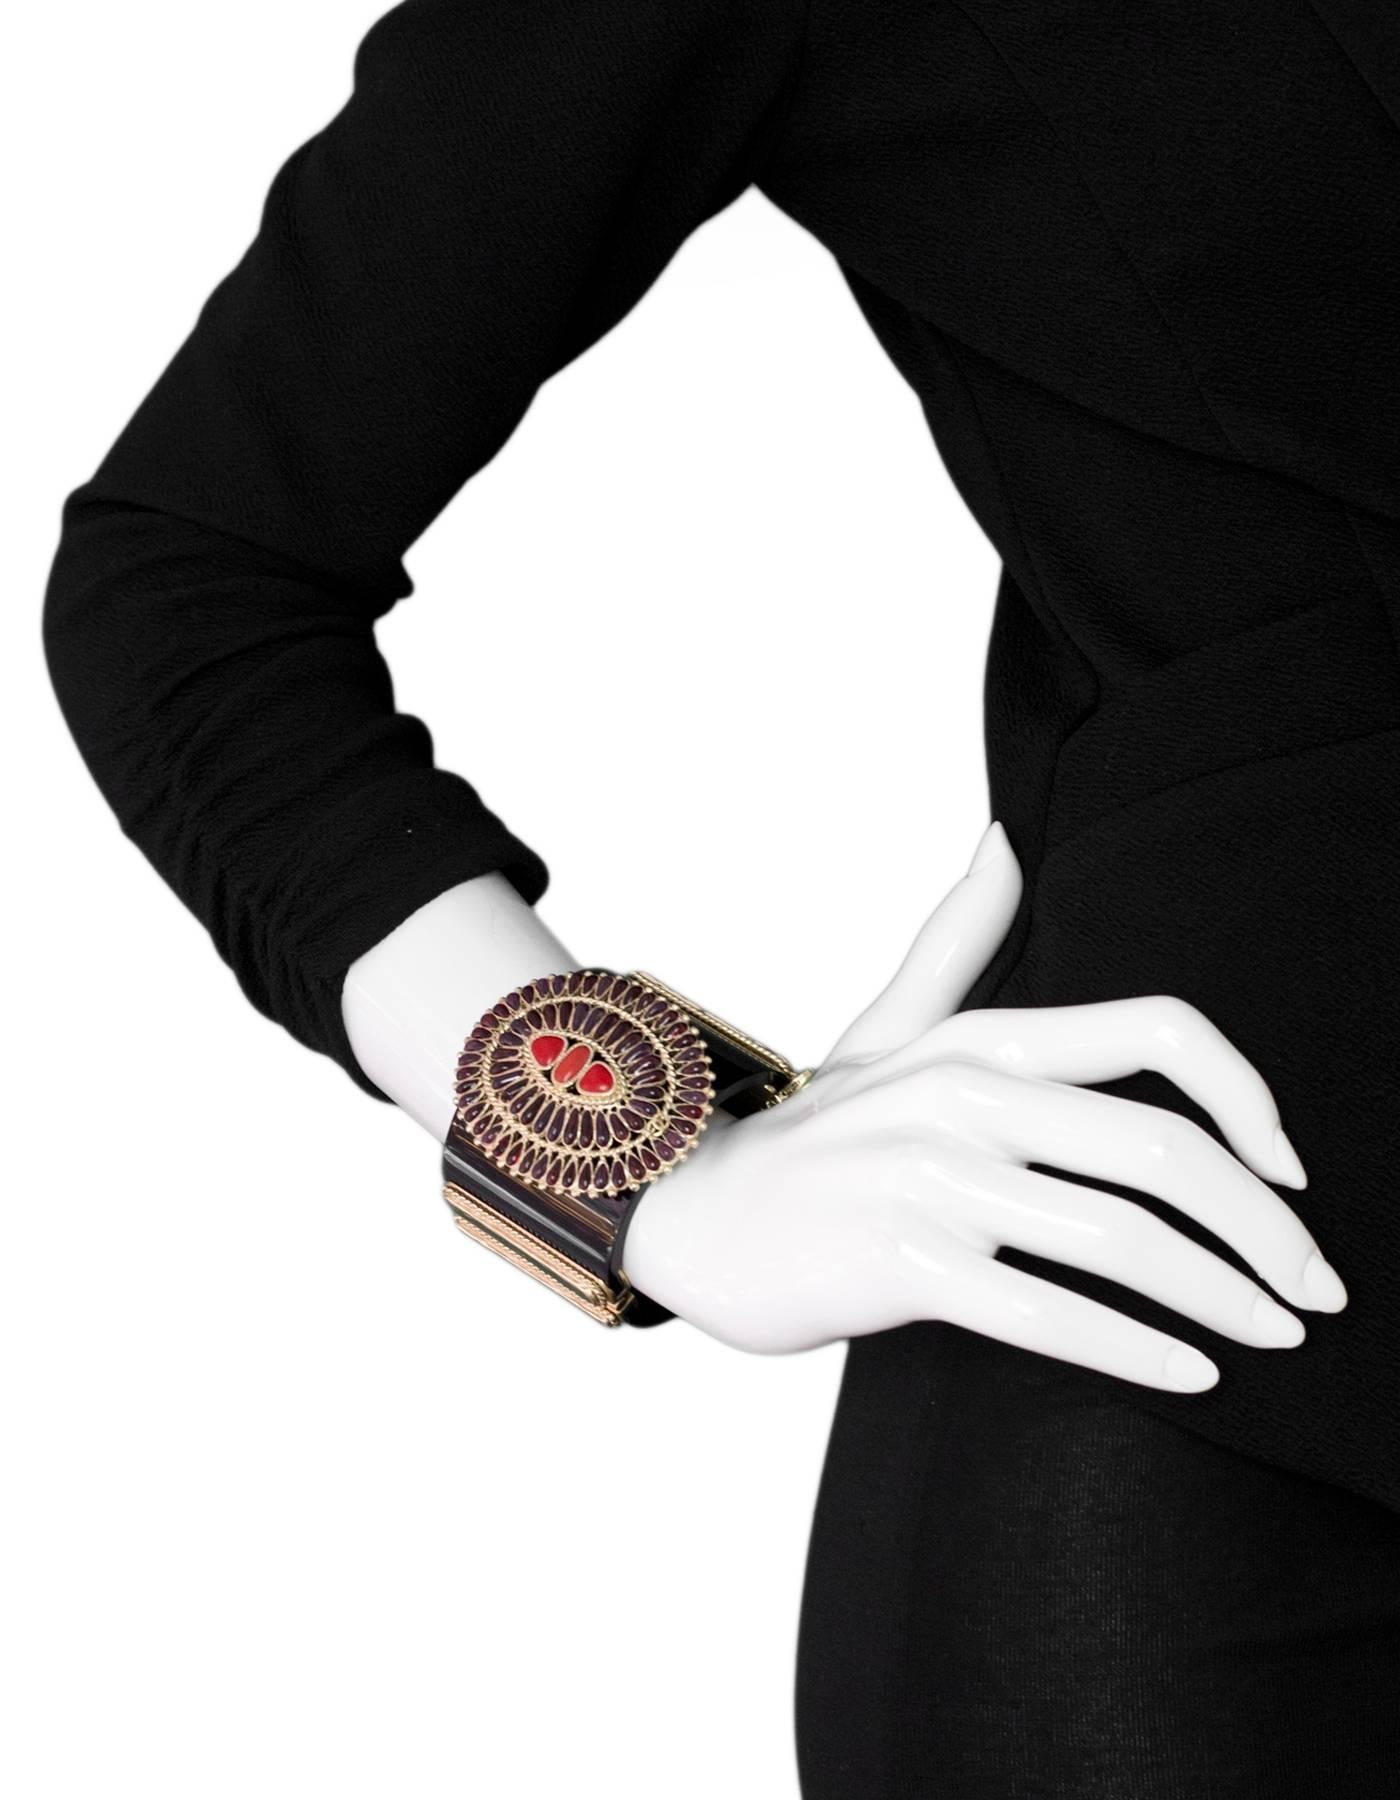 Chanel Black and Red Paris/Dallas 2014 Cuff

Made In: France
Materials: Resin, metal, poured glass
Closure/Opening: Notch closure
Stamp: Chanel A14 CC C MAde in France
Overall Condition: Very good pre-owned condition with the exception of some small